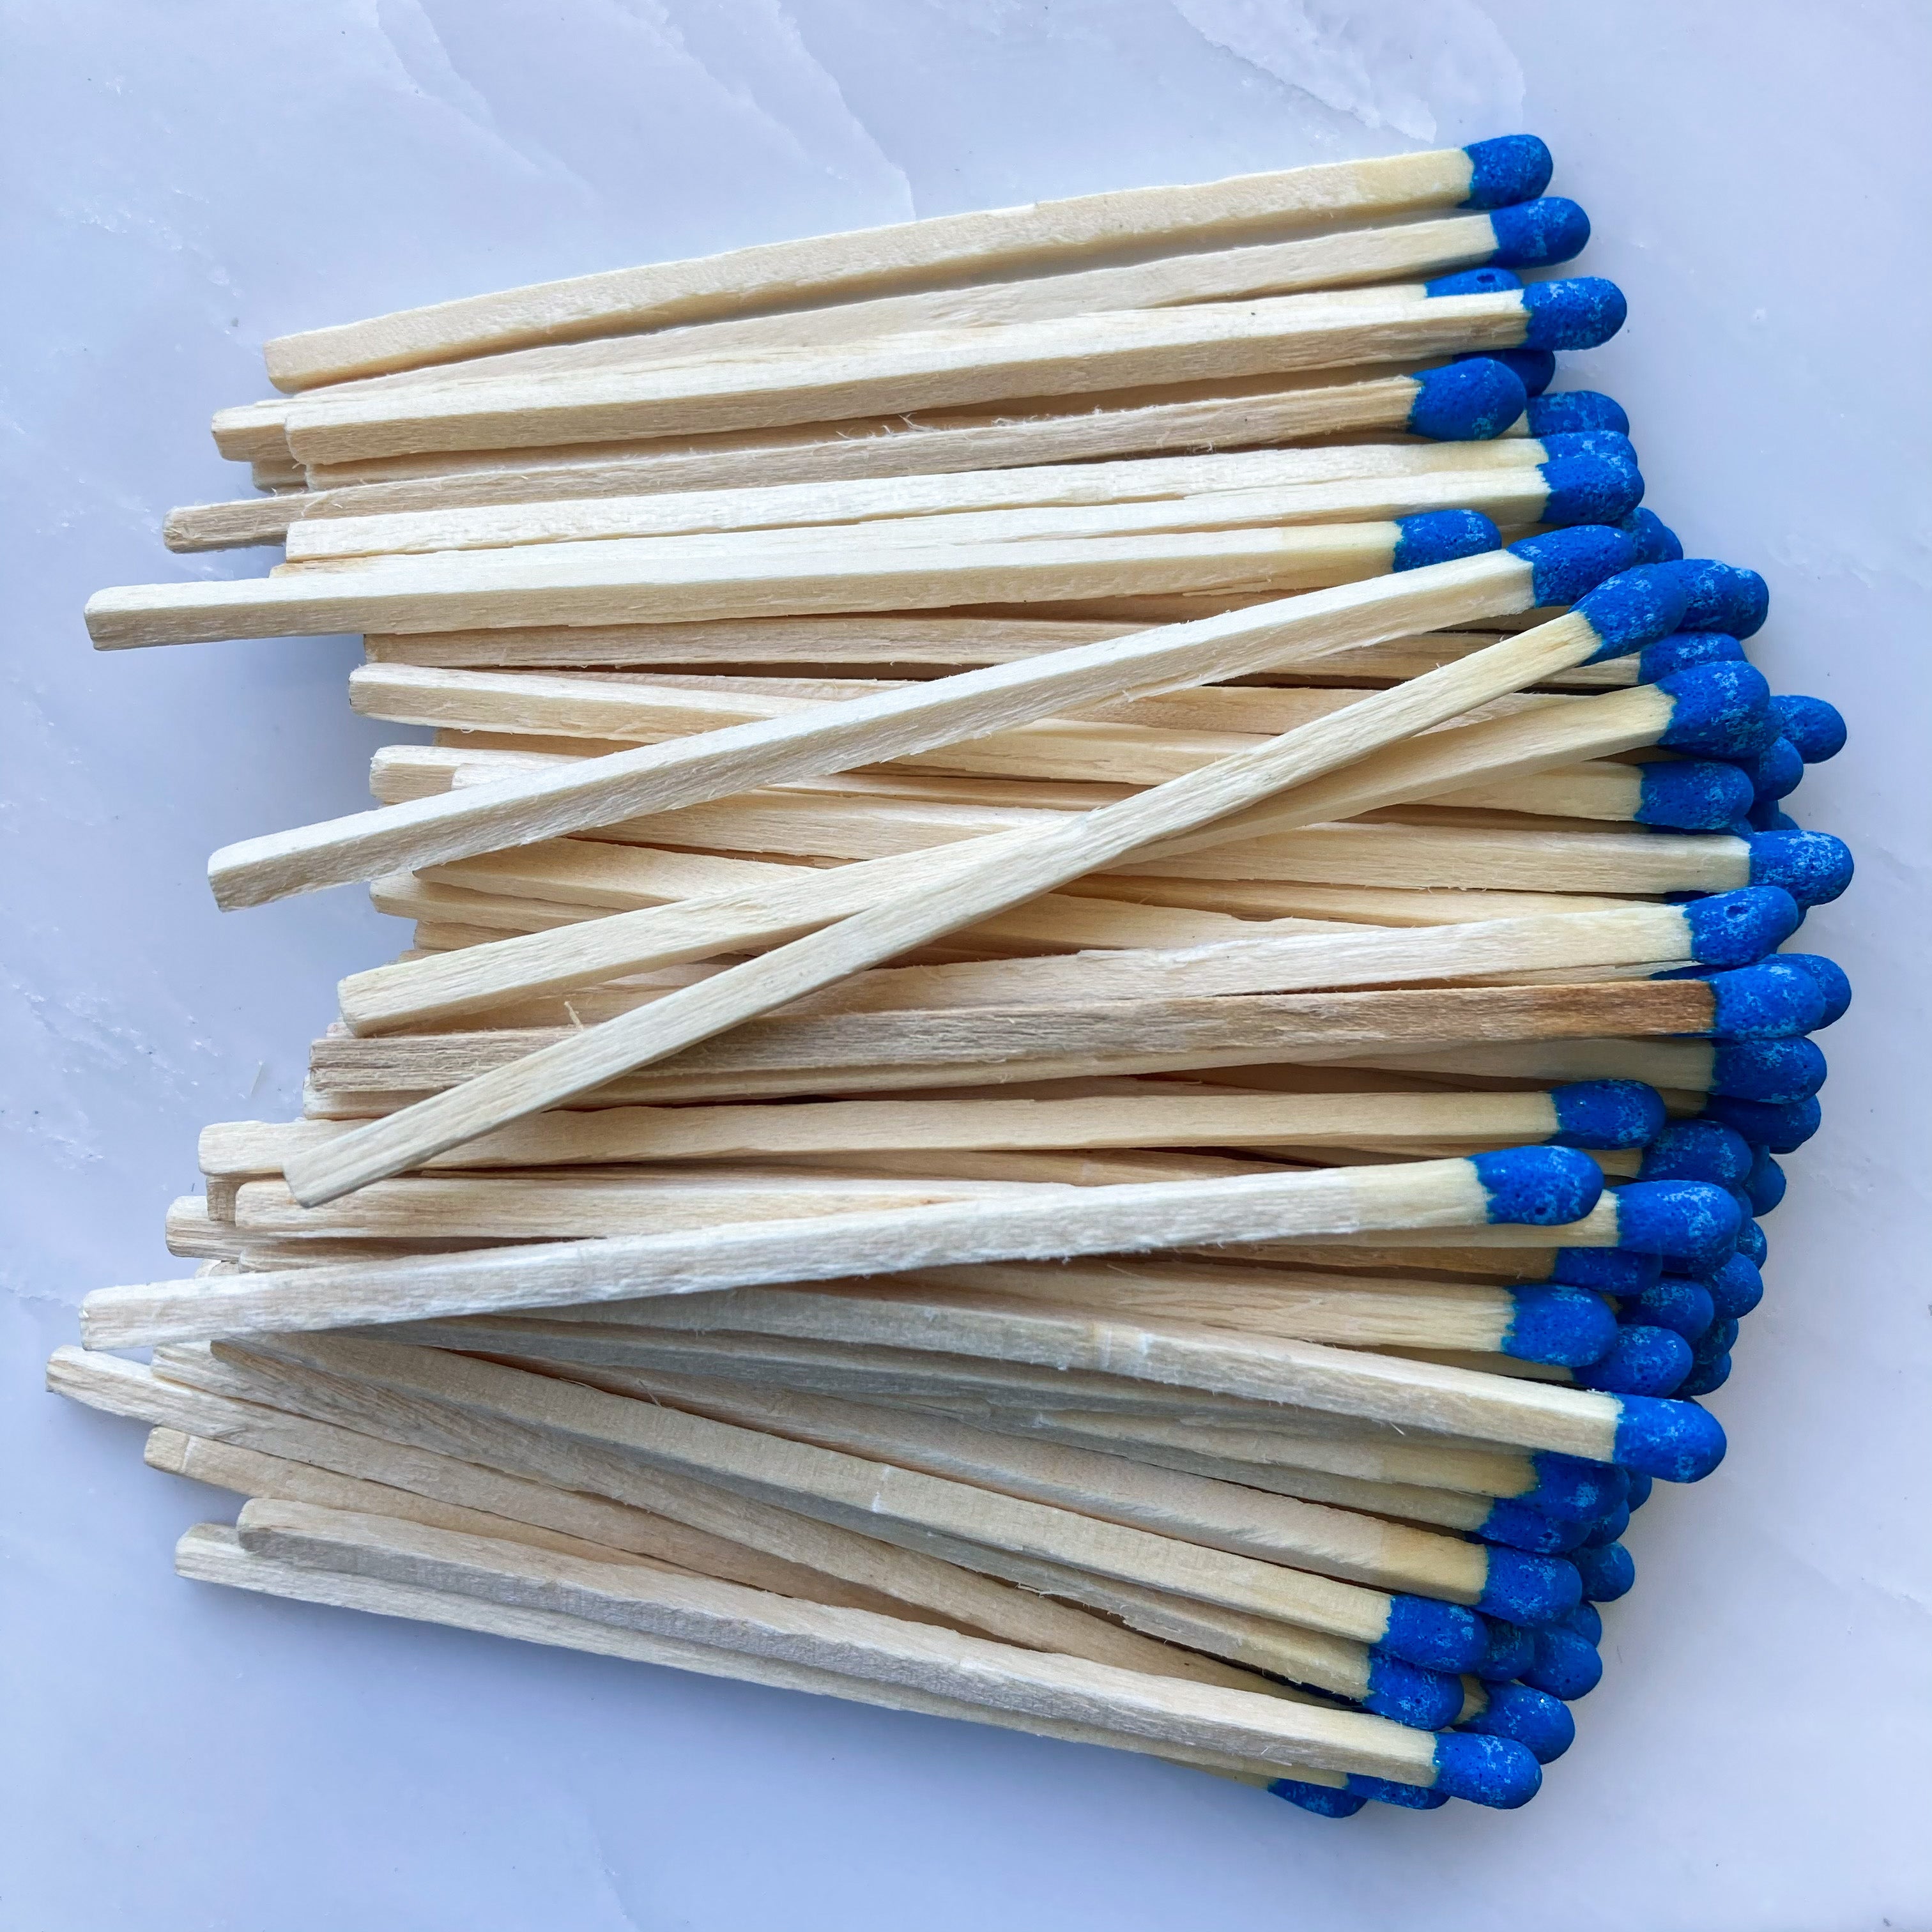 3.5" REFILL MATCHSTICKS. 100 Safety Matches to Refill Your Apothecary or Modern Match Bottle.